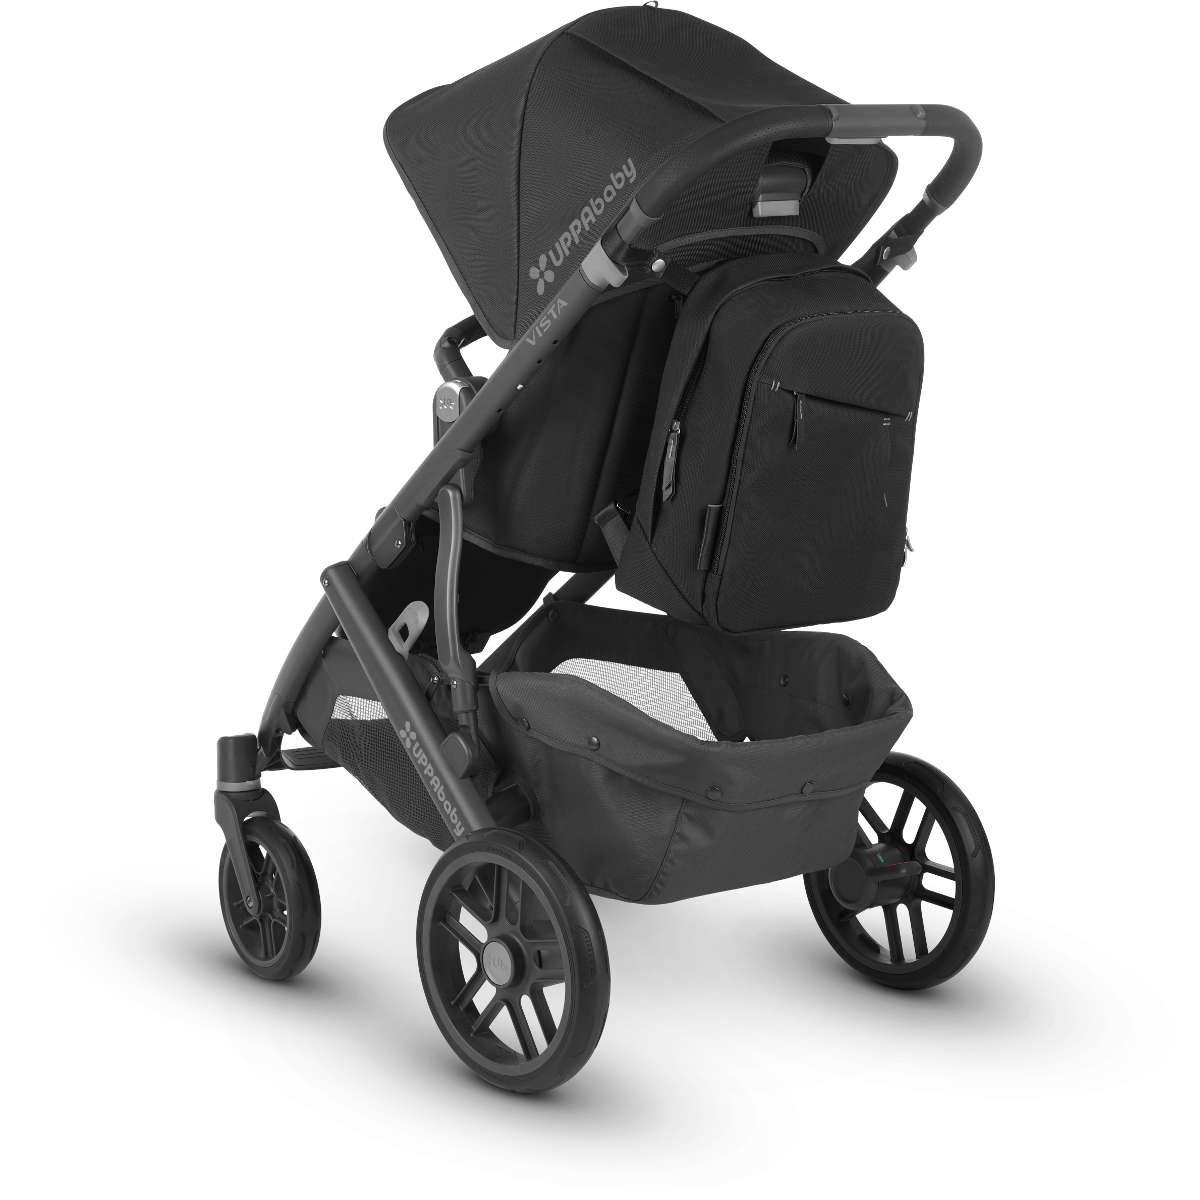 UPPAbaby Changing Backpack - Twinkle Twinkle Little One